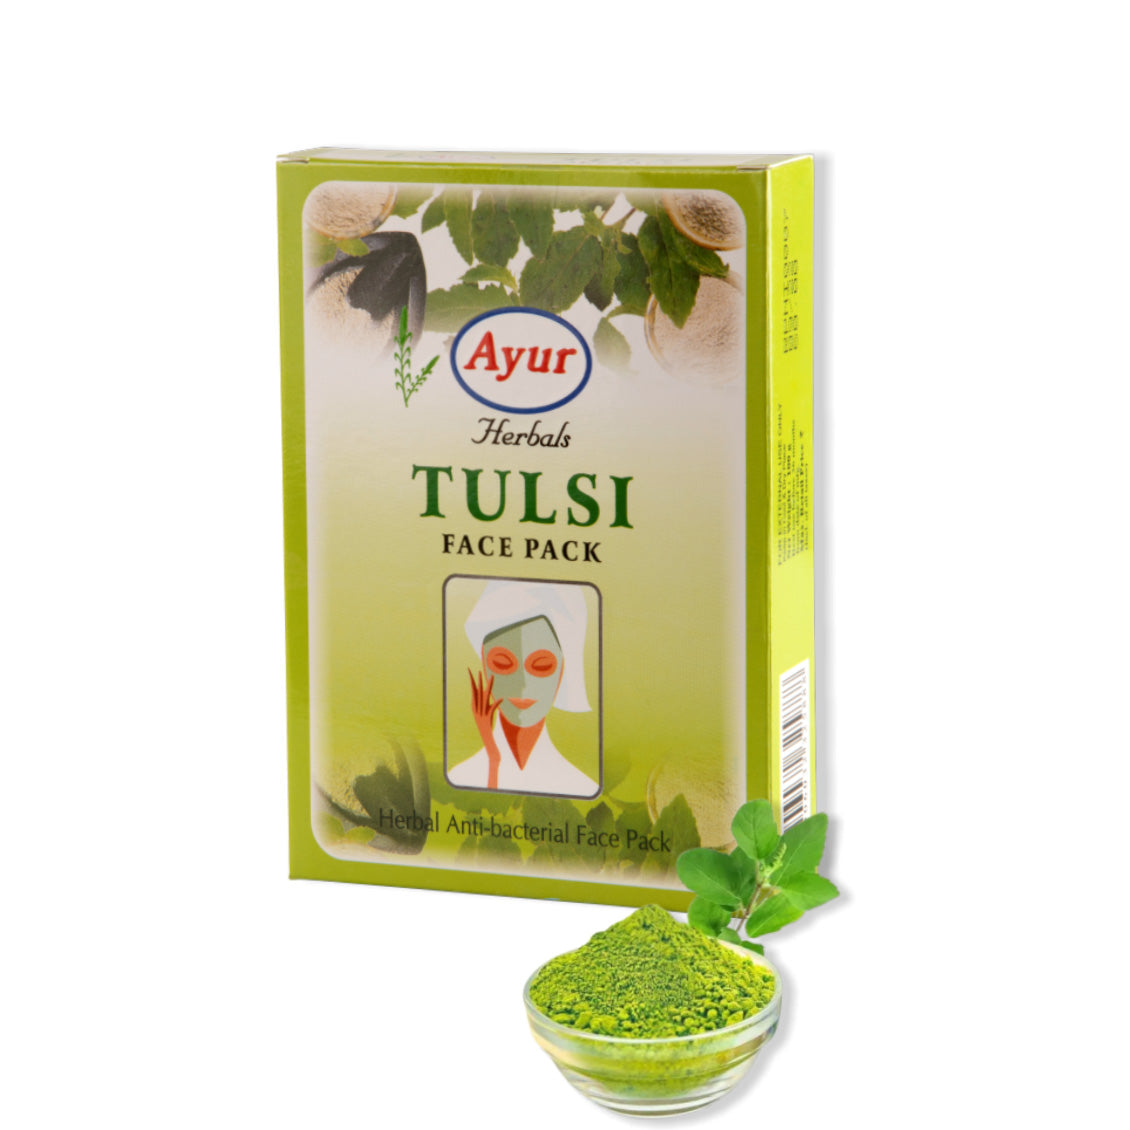 Tulsi Face Pack